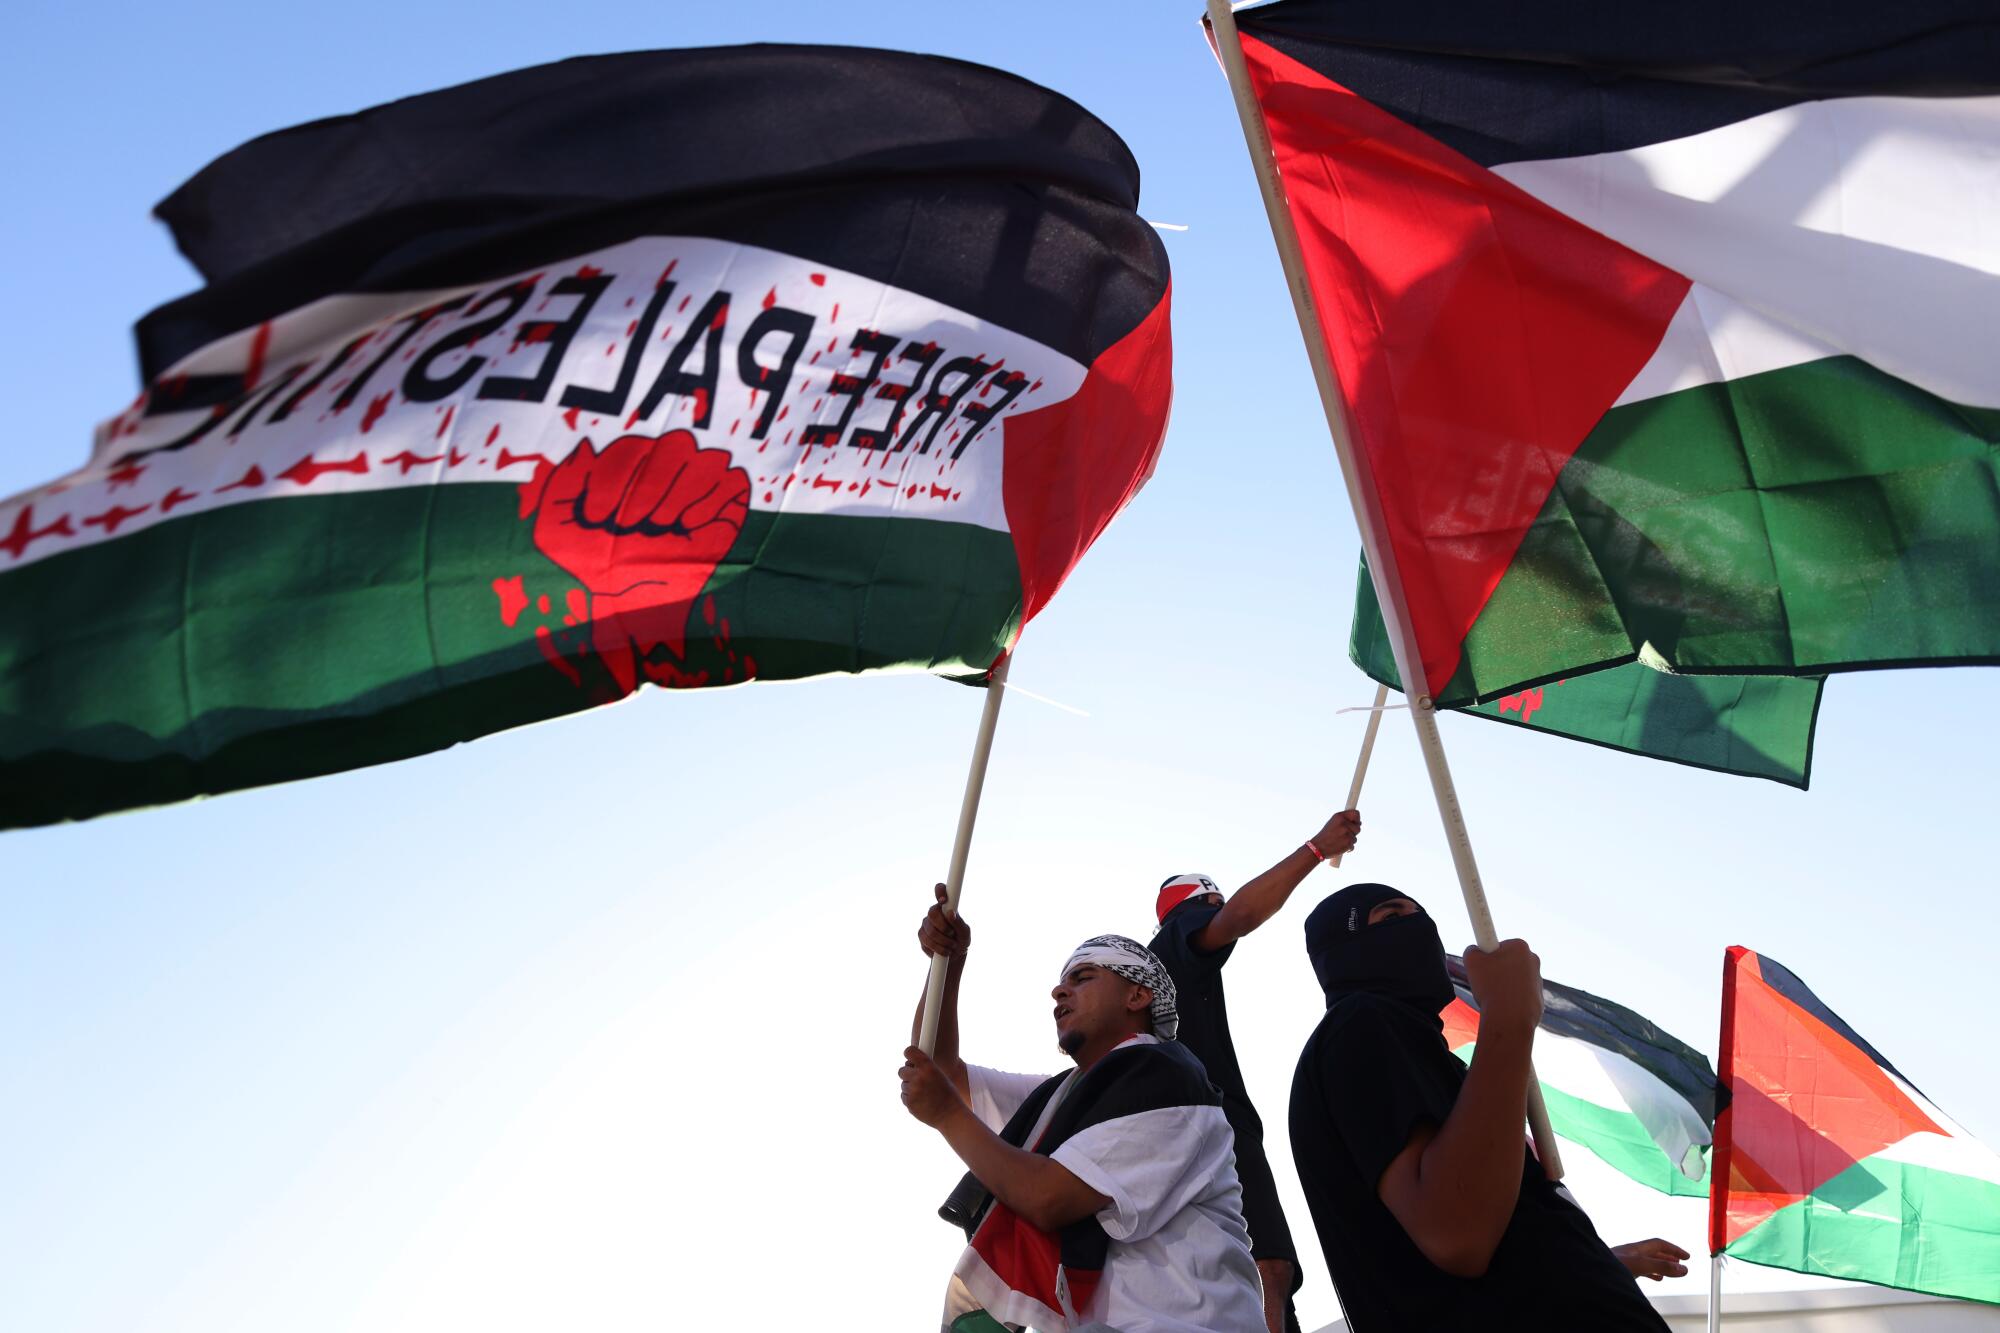 Pro-Palestinian protesters gather and wave flags near the Israeli Consulate in West L.A.